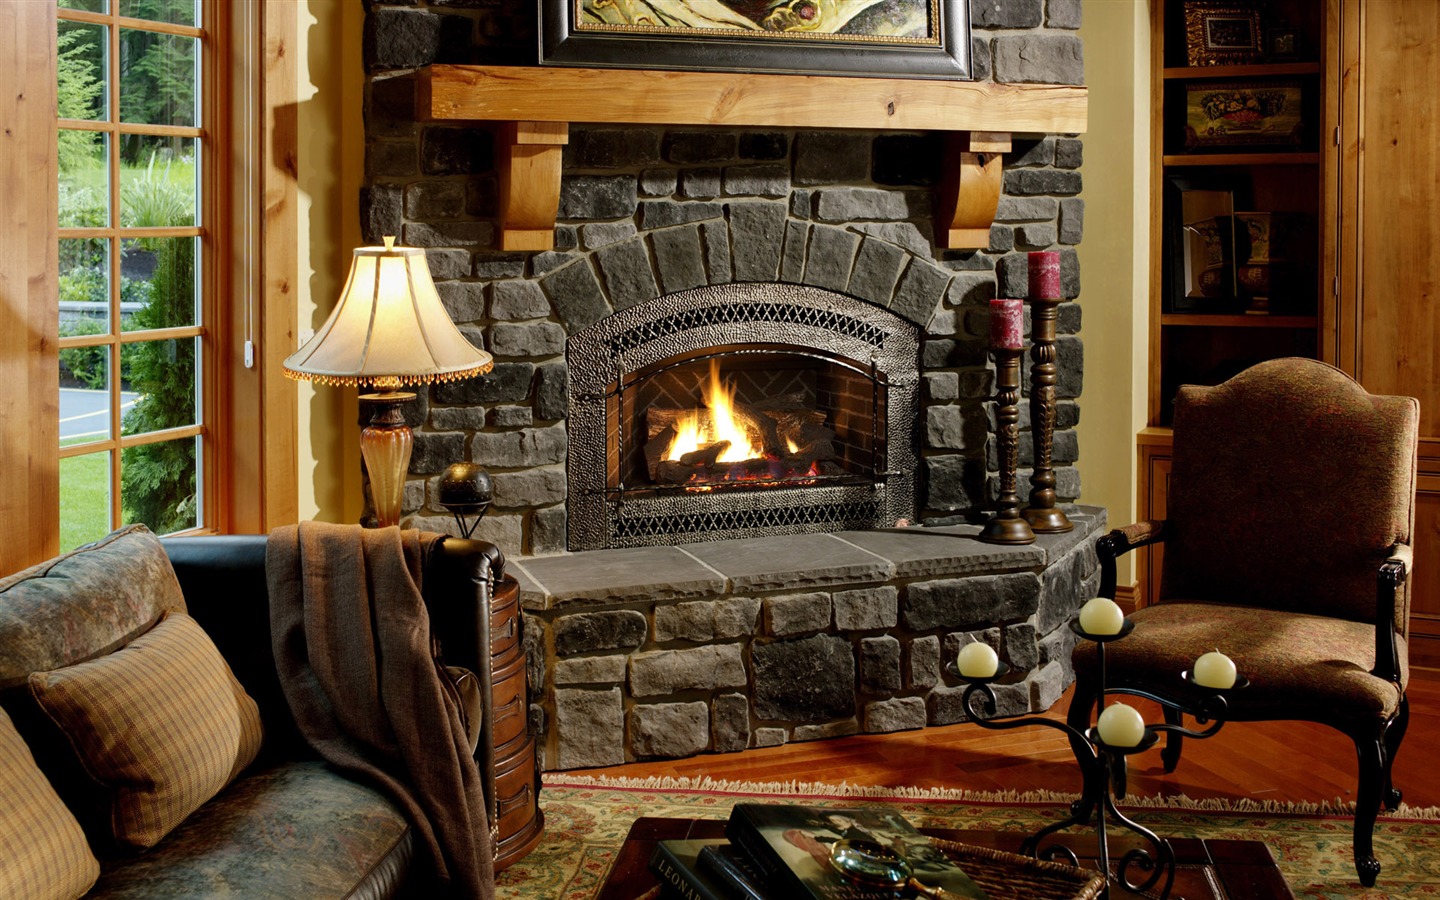 Western-style family fireplace wallpaper (1) #19 - 1440x900